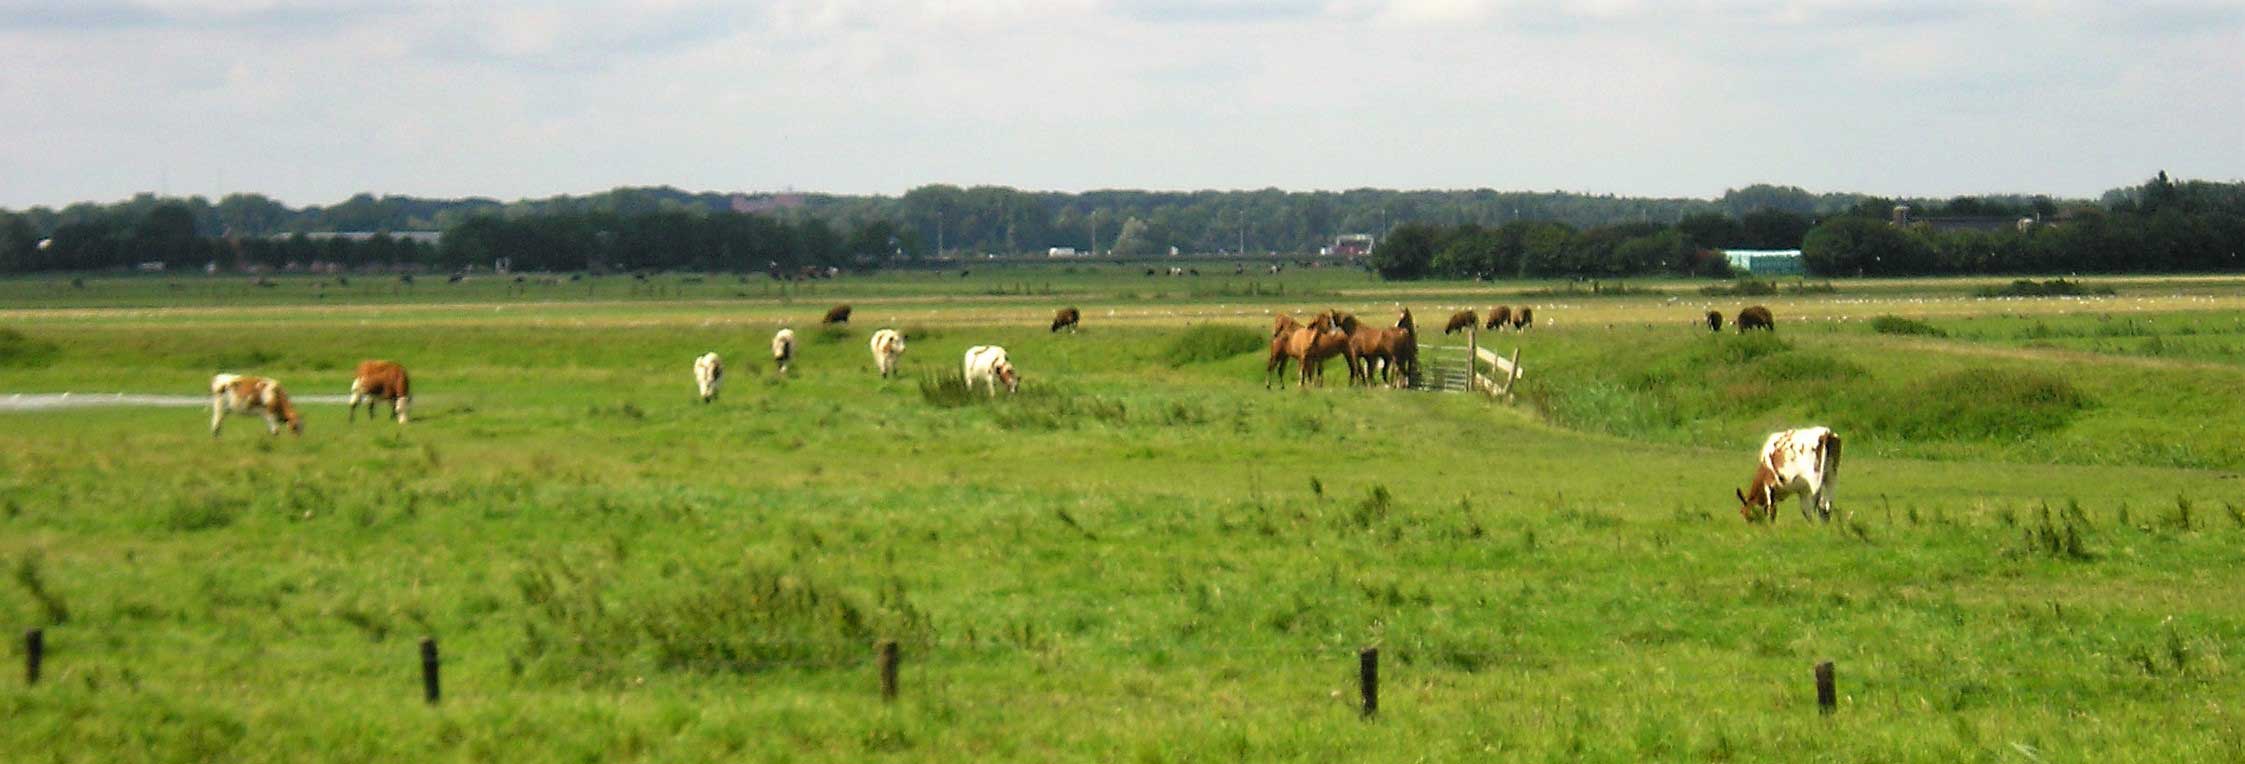 Meadows, horses and cattle near Eem river